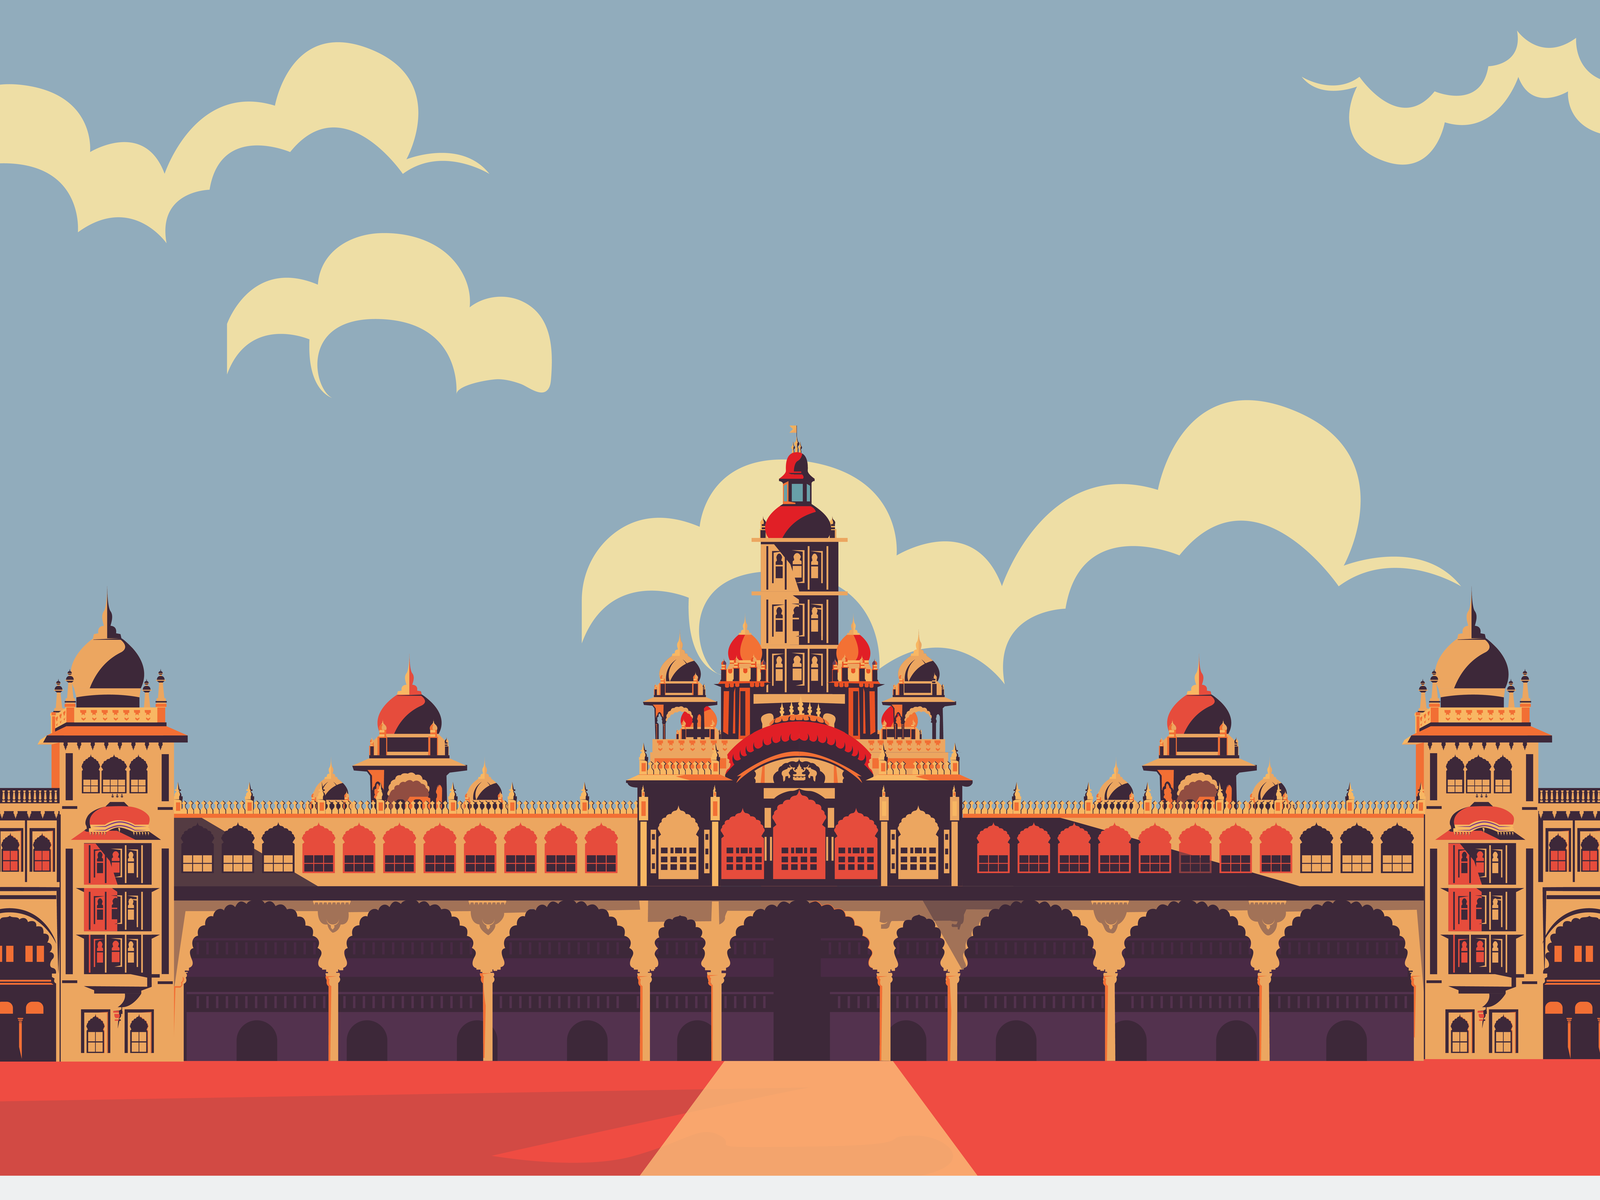 Mysore Palace by darshan on Dribbble